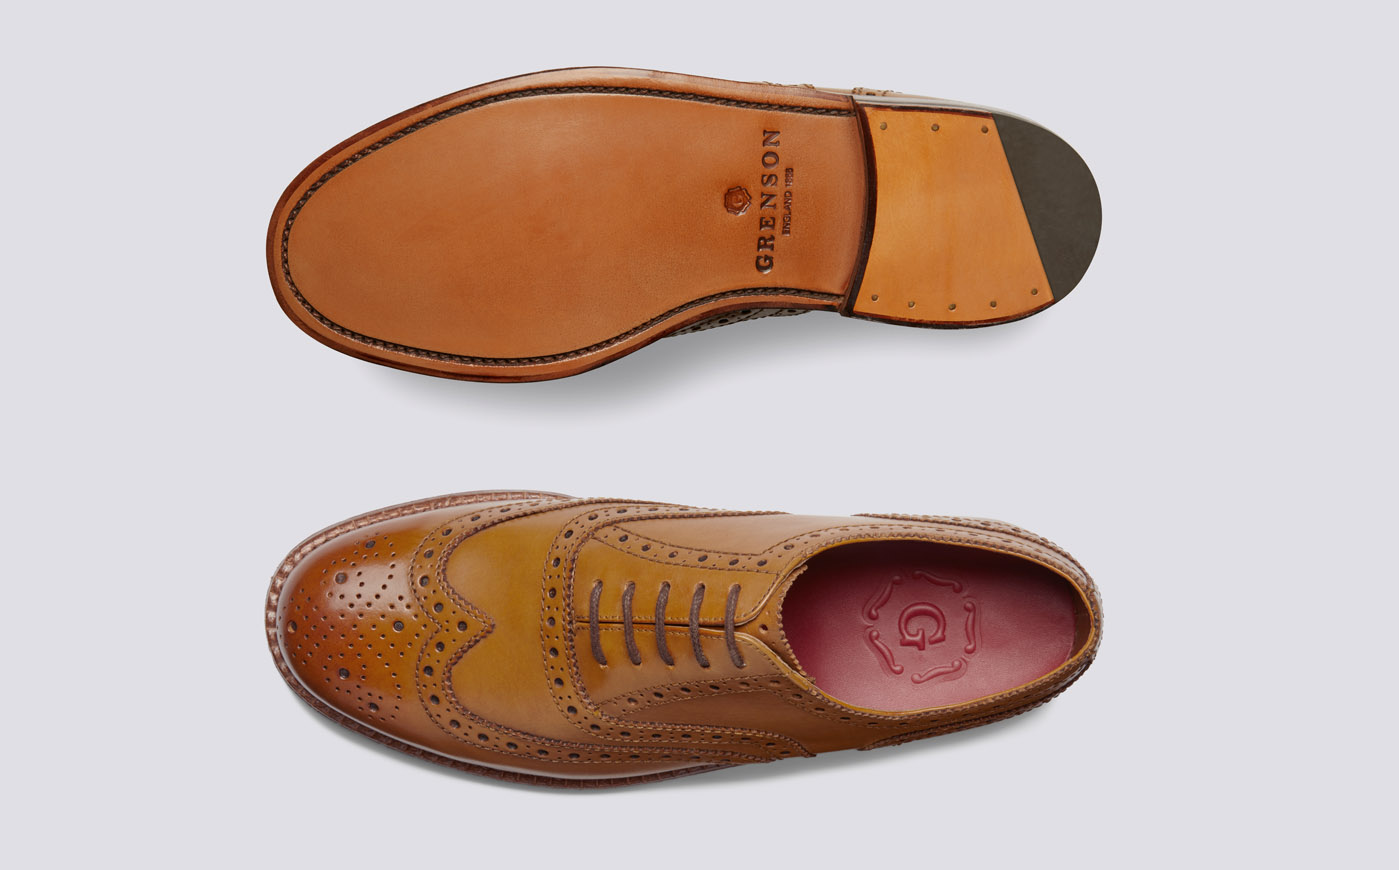 Grenson Stanley Tan Oxford Brogue Leather Shoes